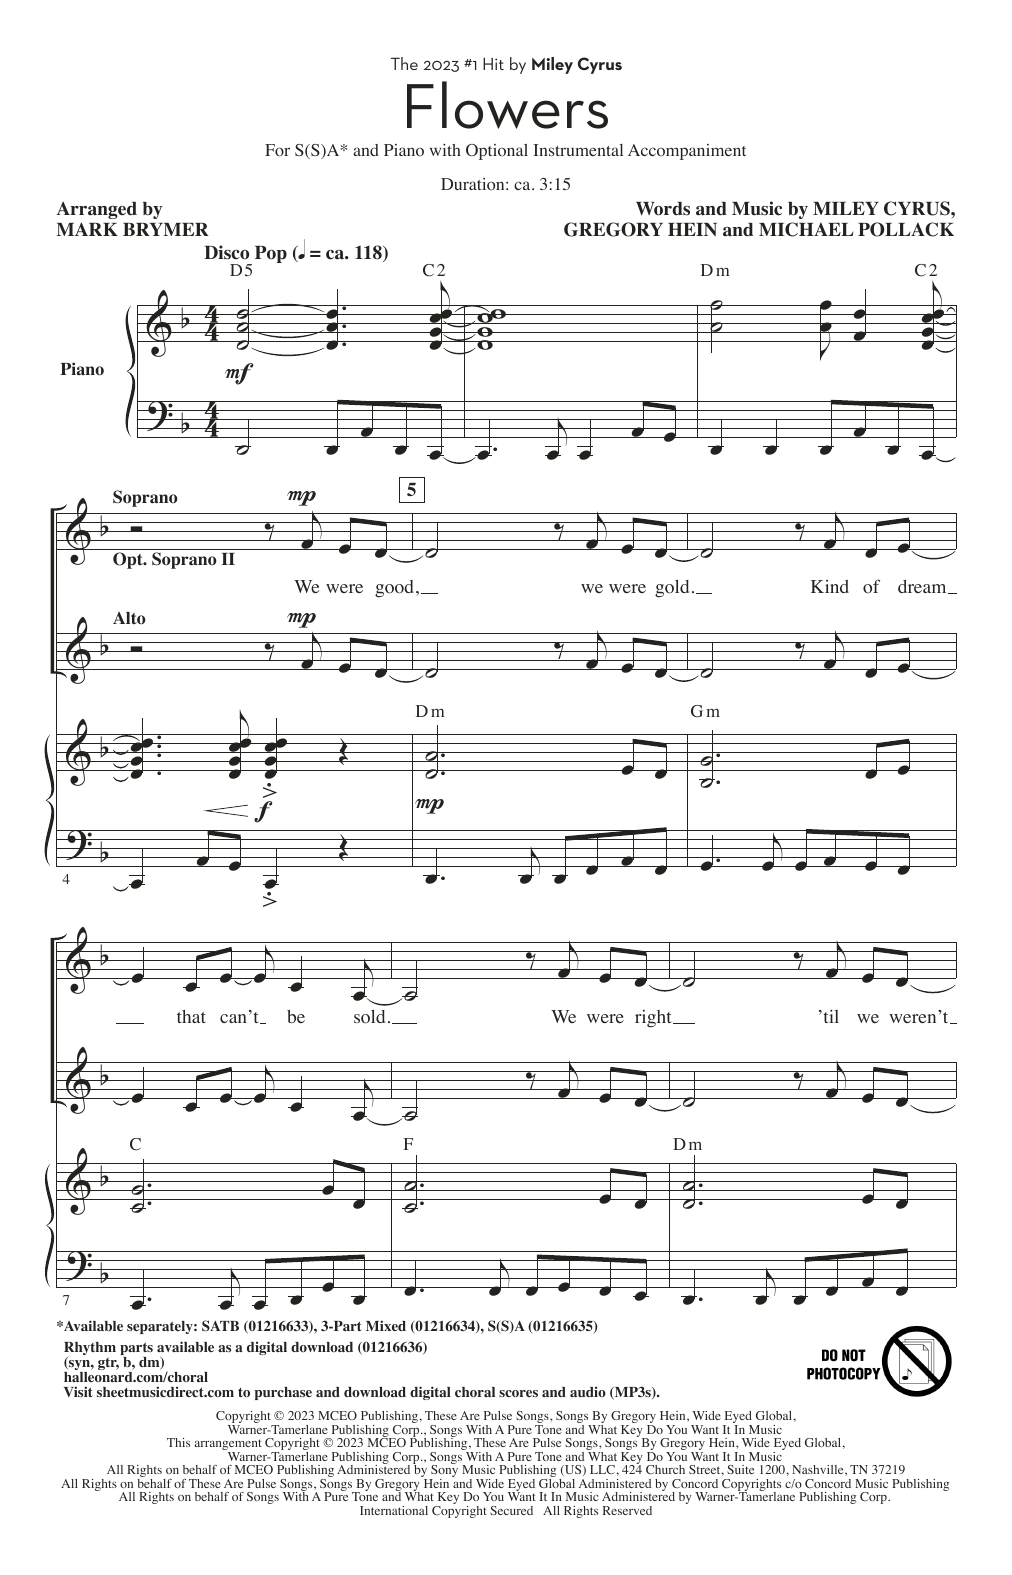 Download Miley Cyrus Flowers (arr. Mark Brymer) Sheet Music